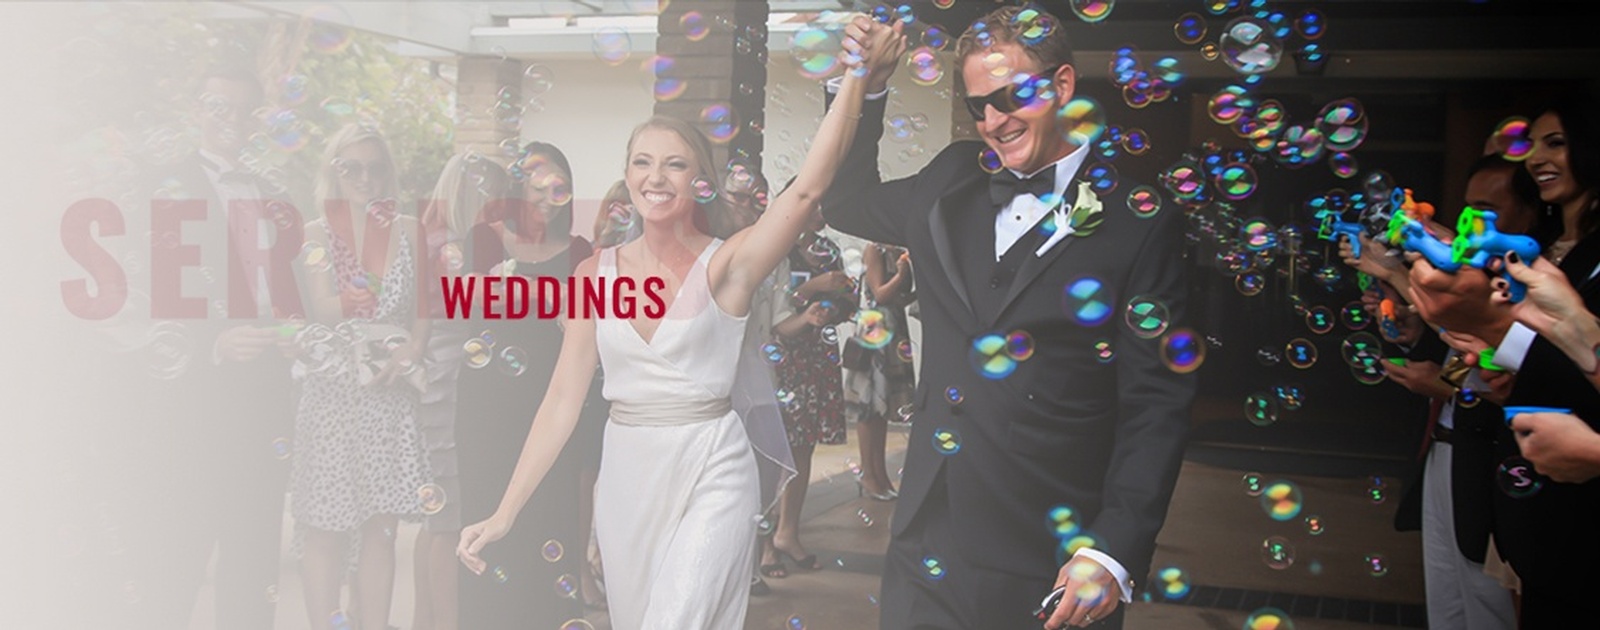 Wedding Video Production by Sparkle Films LLC - Video Production Company Dana Point 